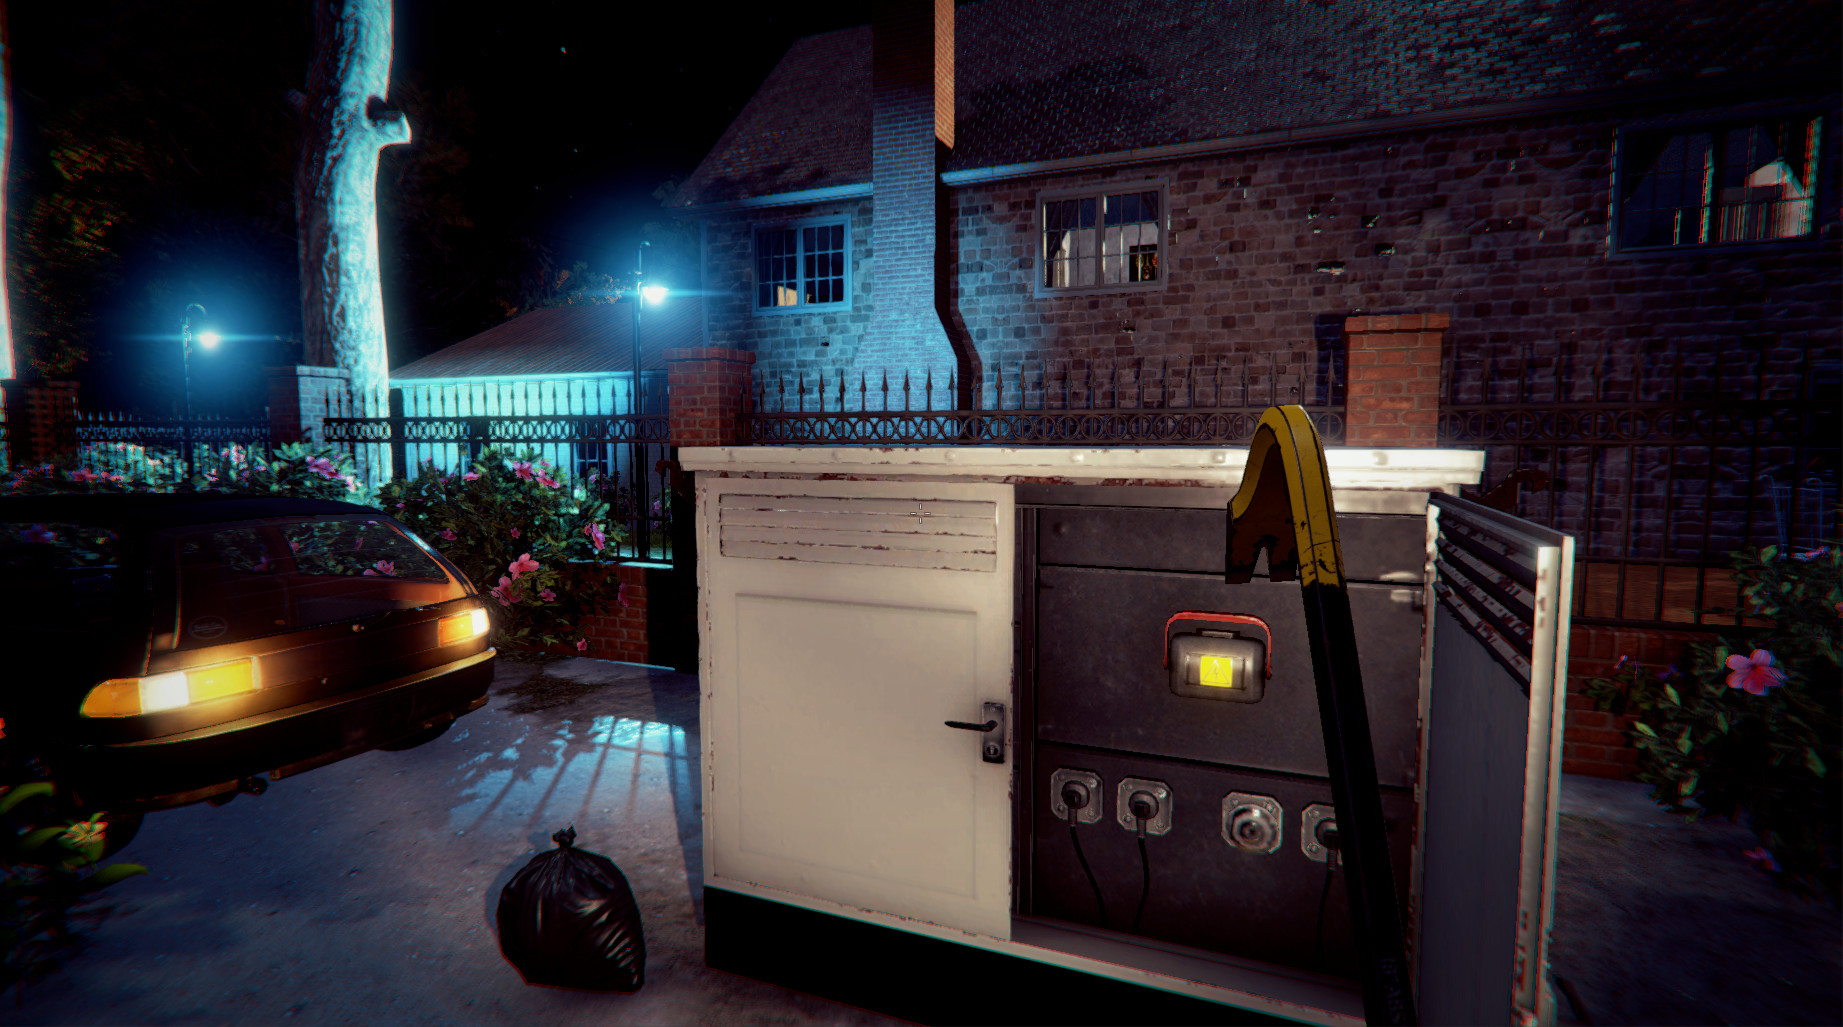 Best simulation games: Thief Simulator sees you modifying the game's security systems